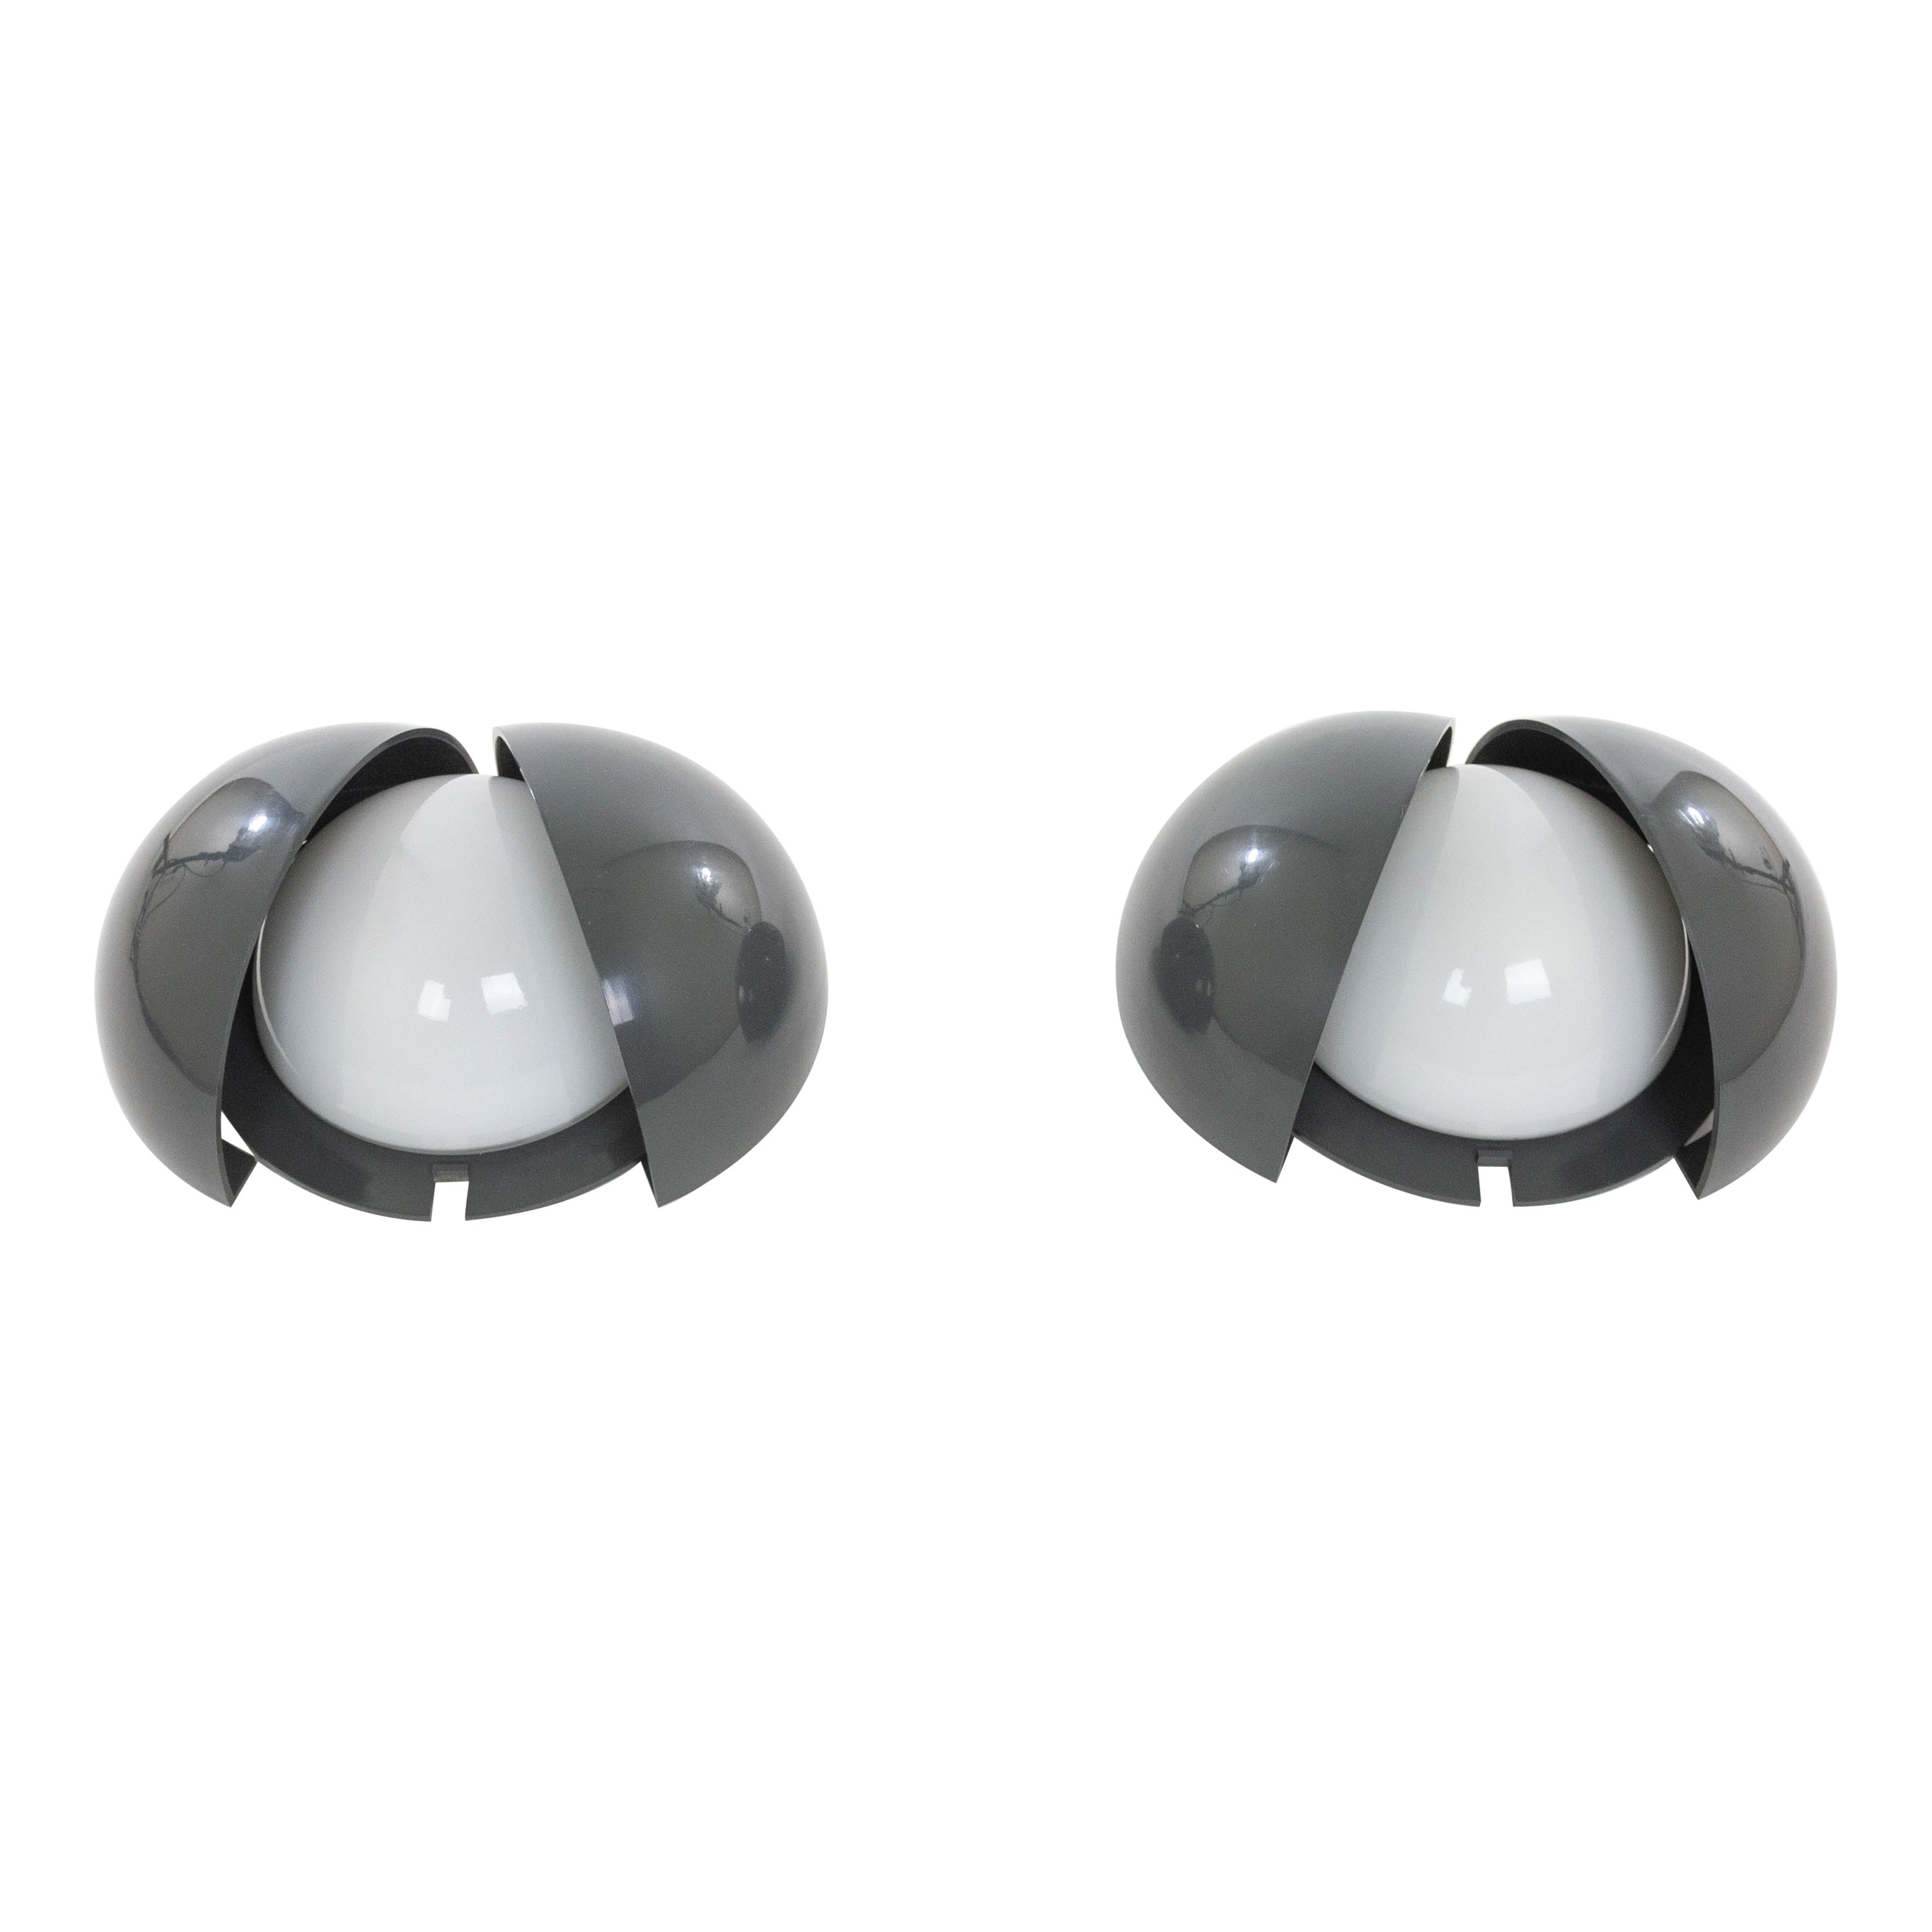 Pair of grey Lampira wall lamps by G.P.A. Monti for Fontana Arte, 1970s For Sale